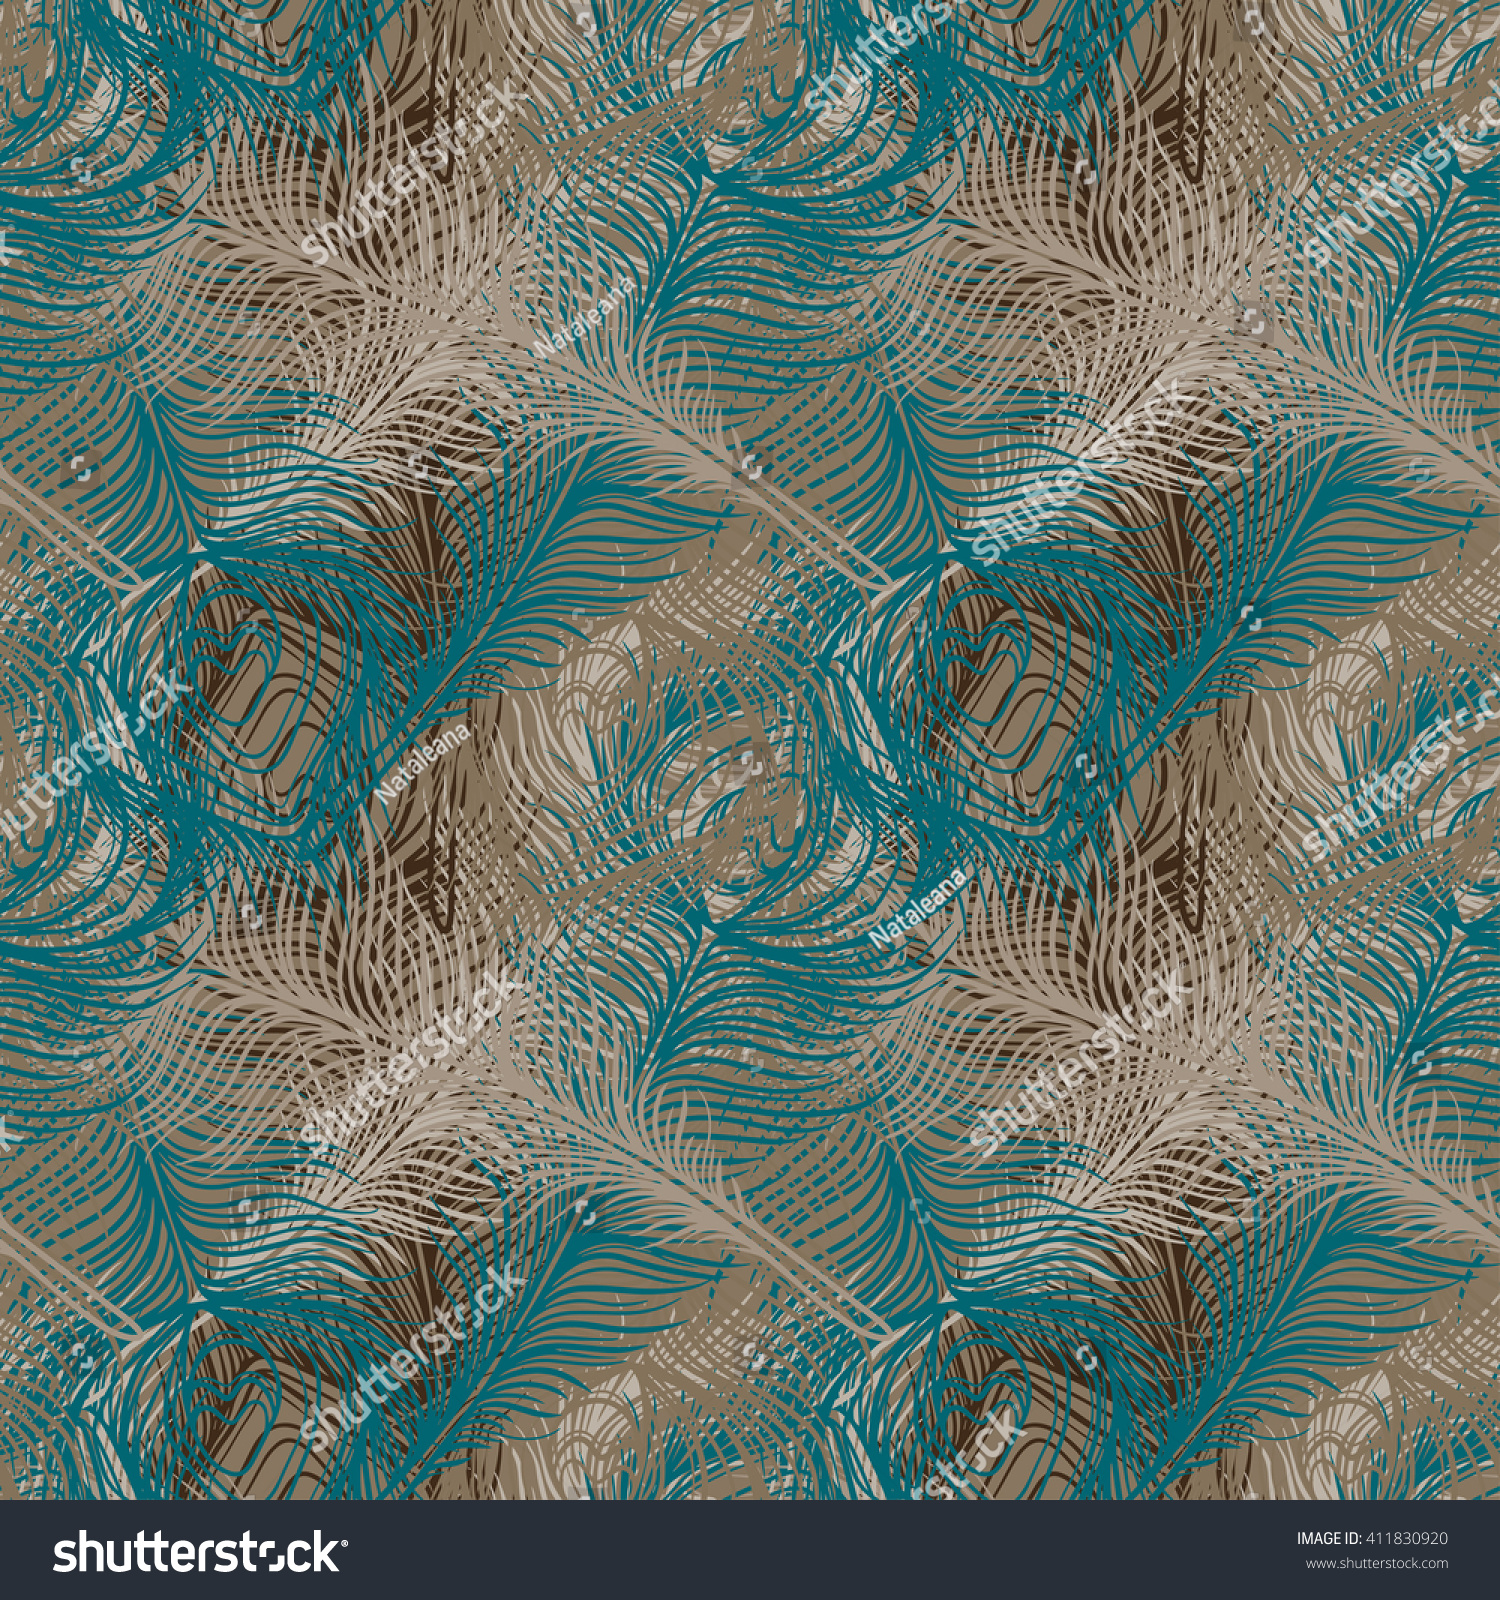 Peacock Feathers Colorful Seamless Pattern Repeating Stock ...